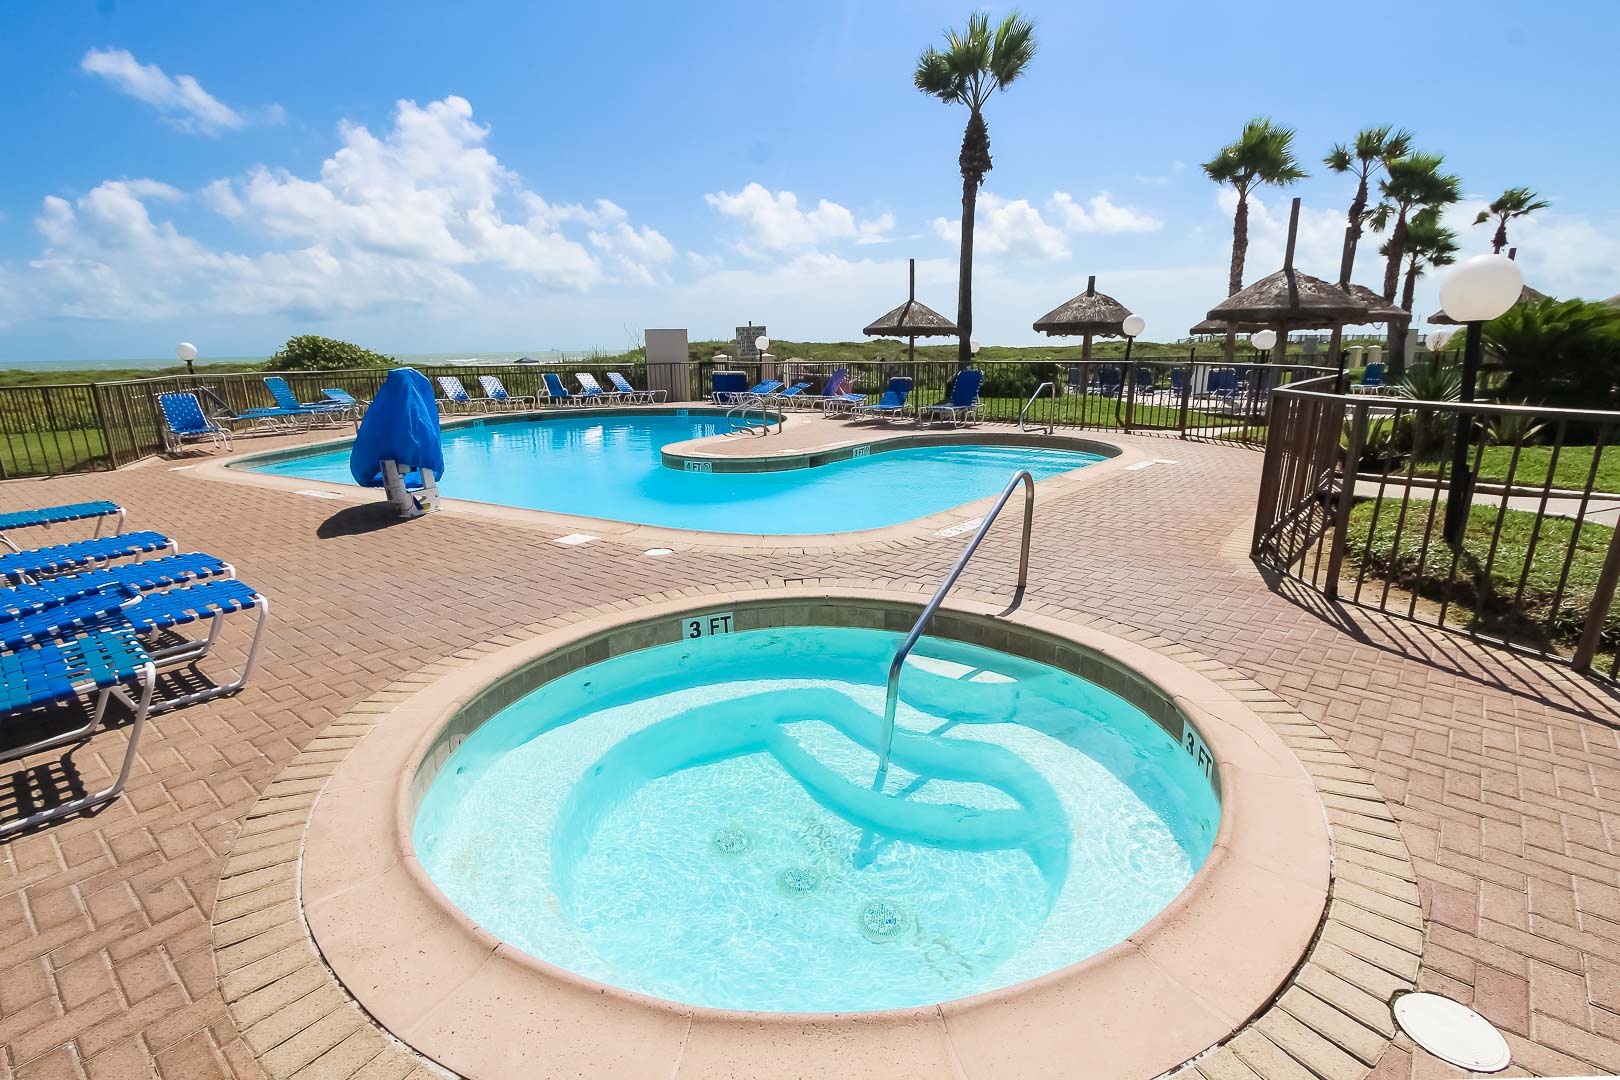 A peaceful outdoor swimming pool and Jacuzzi  at VRI's Royale Beach and Tennis Club.